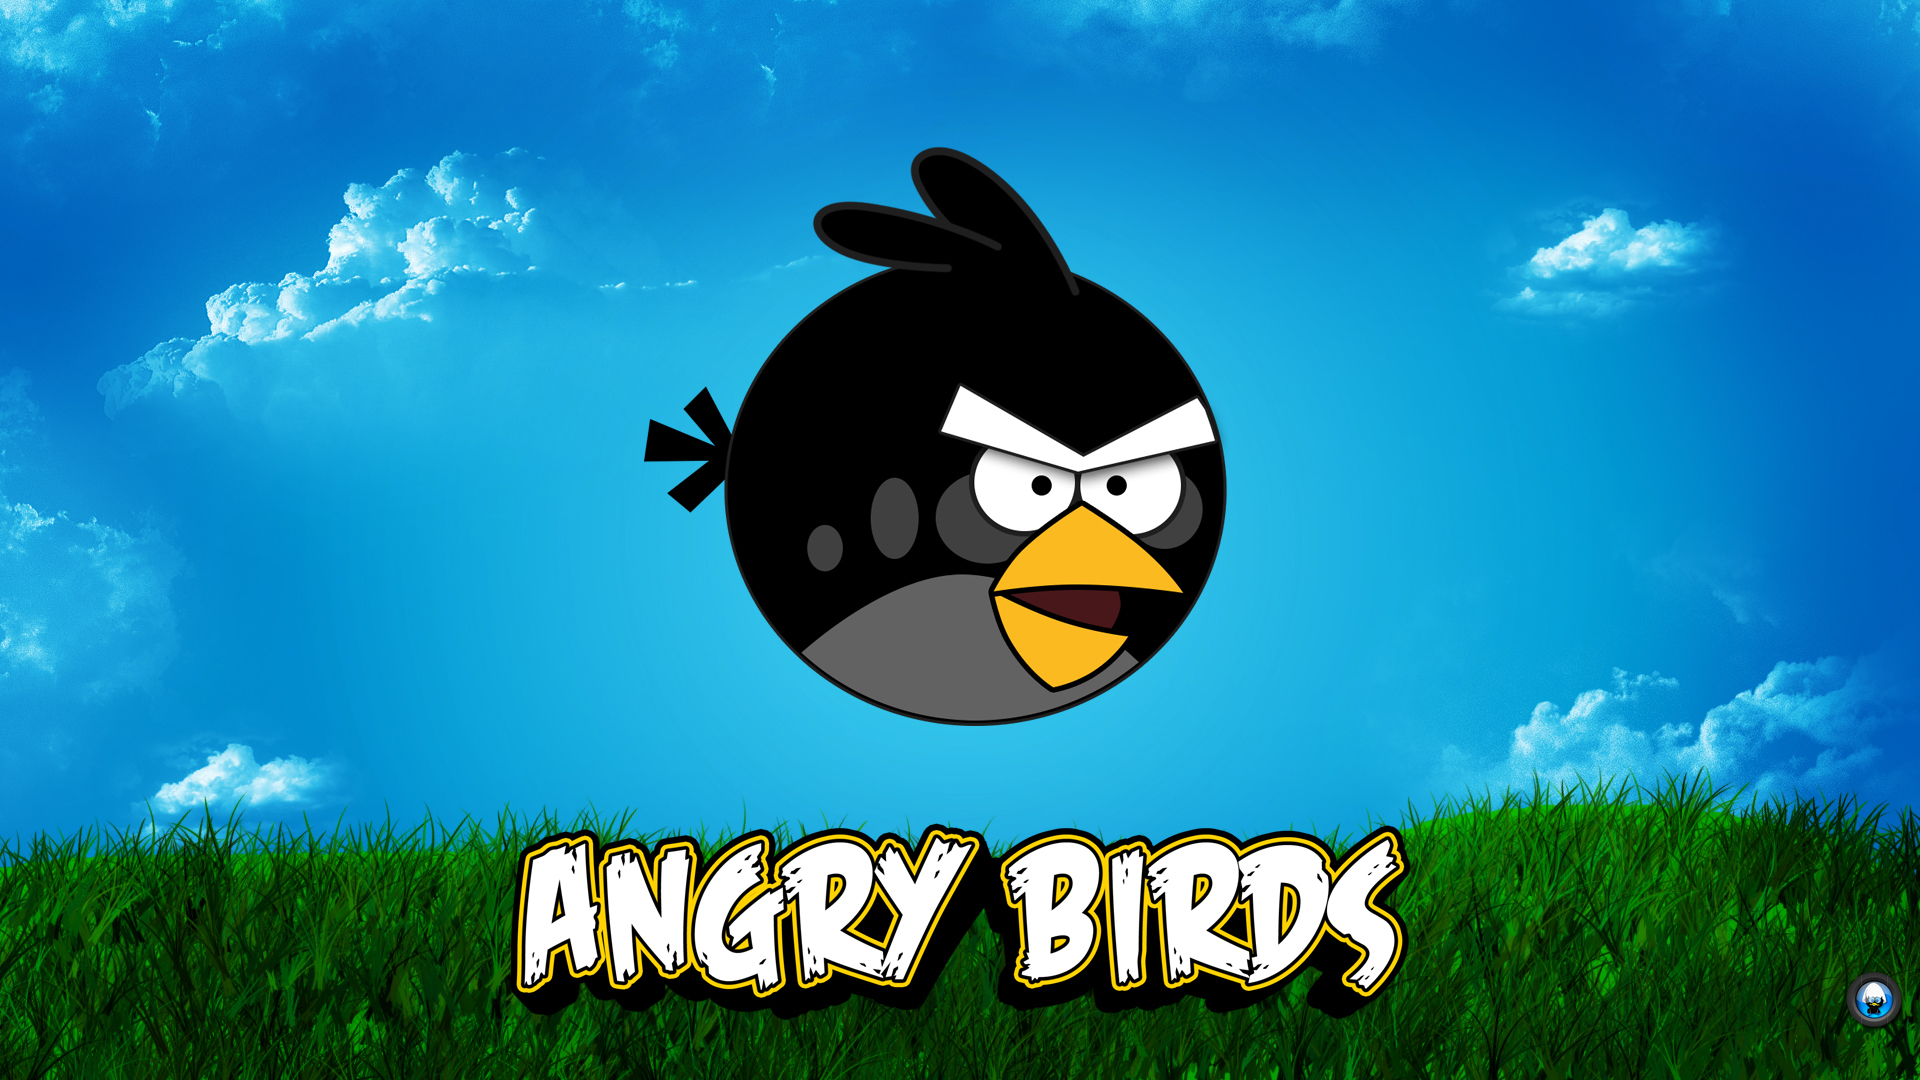 Angry Birds Red Bird Game Games 1920x1080